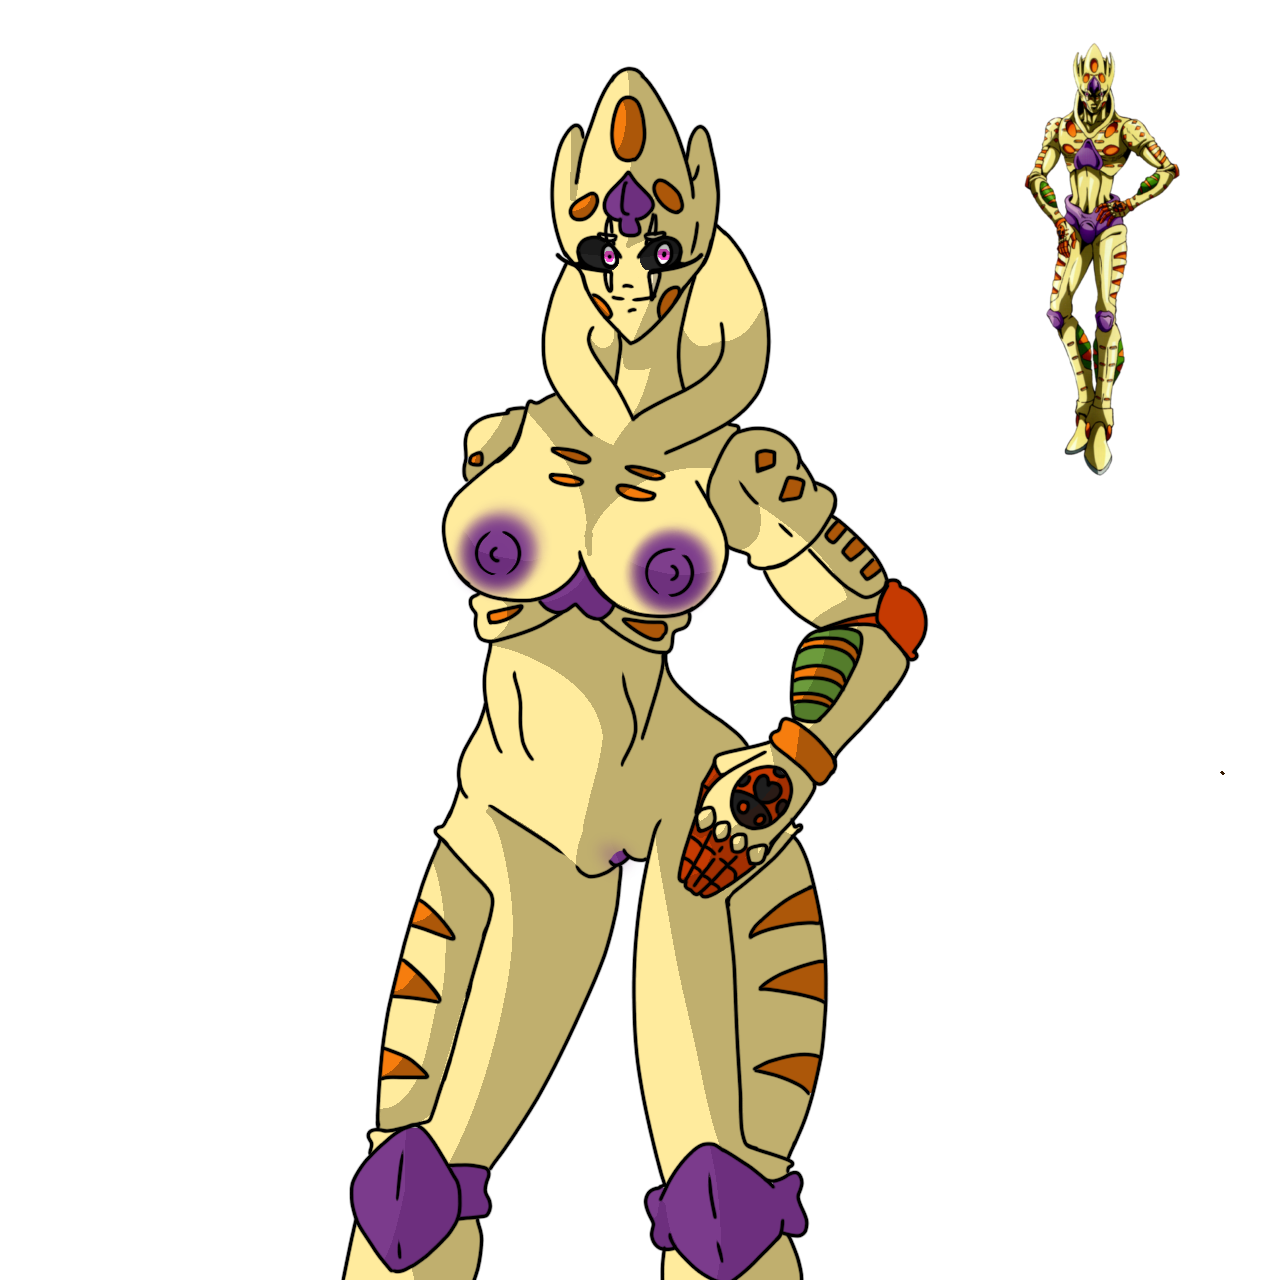 gold experience requiem, rule 63, exposed, exposed breasts, exposed pussy, stand...